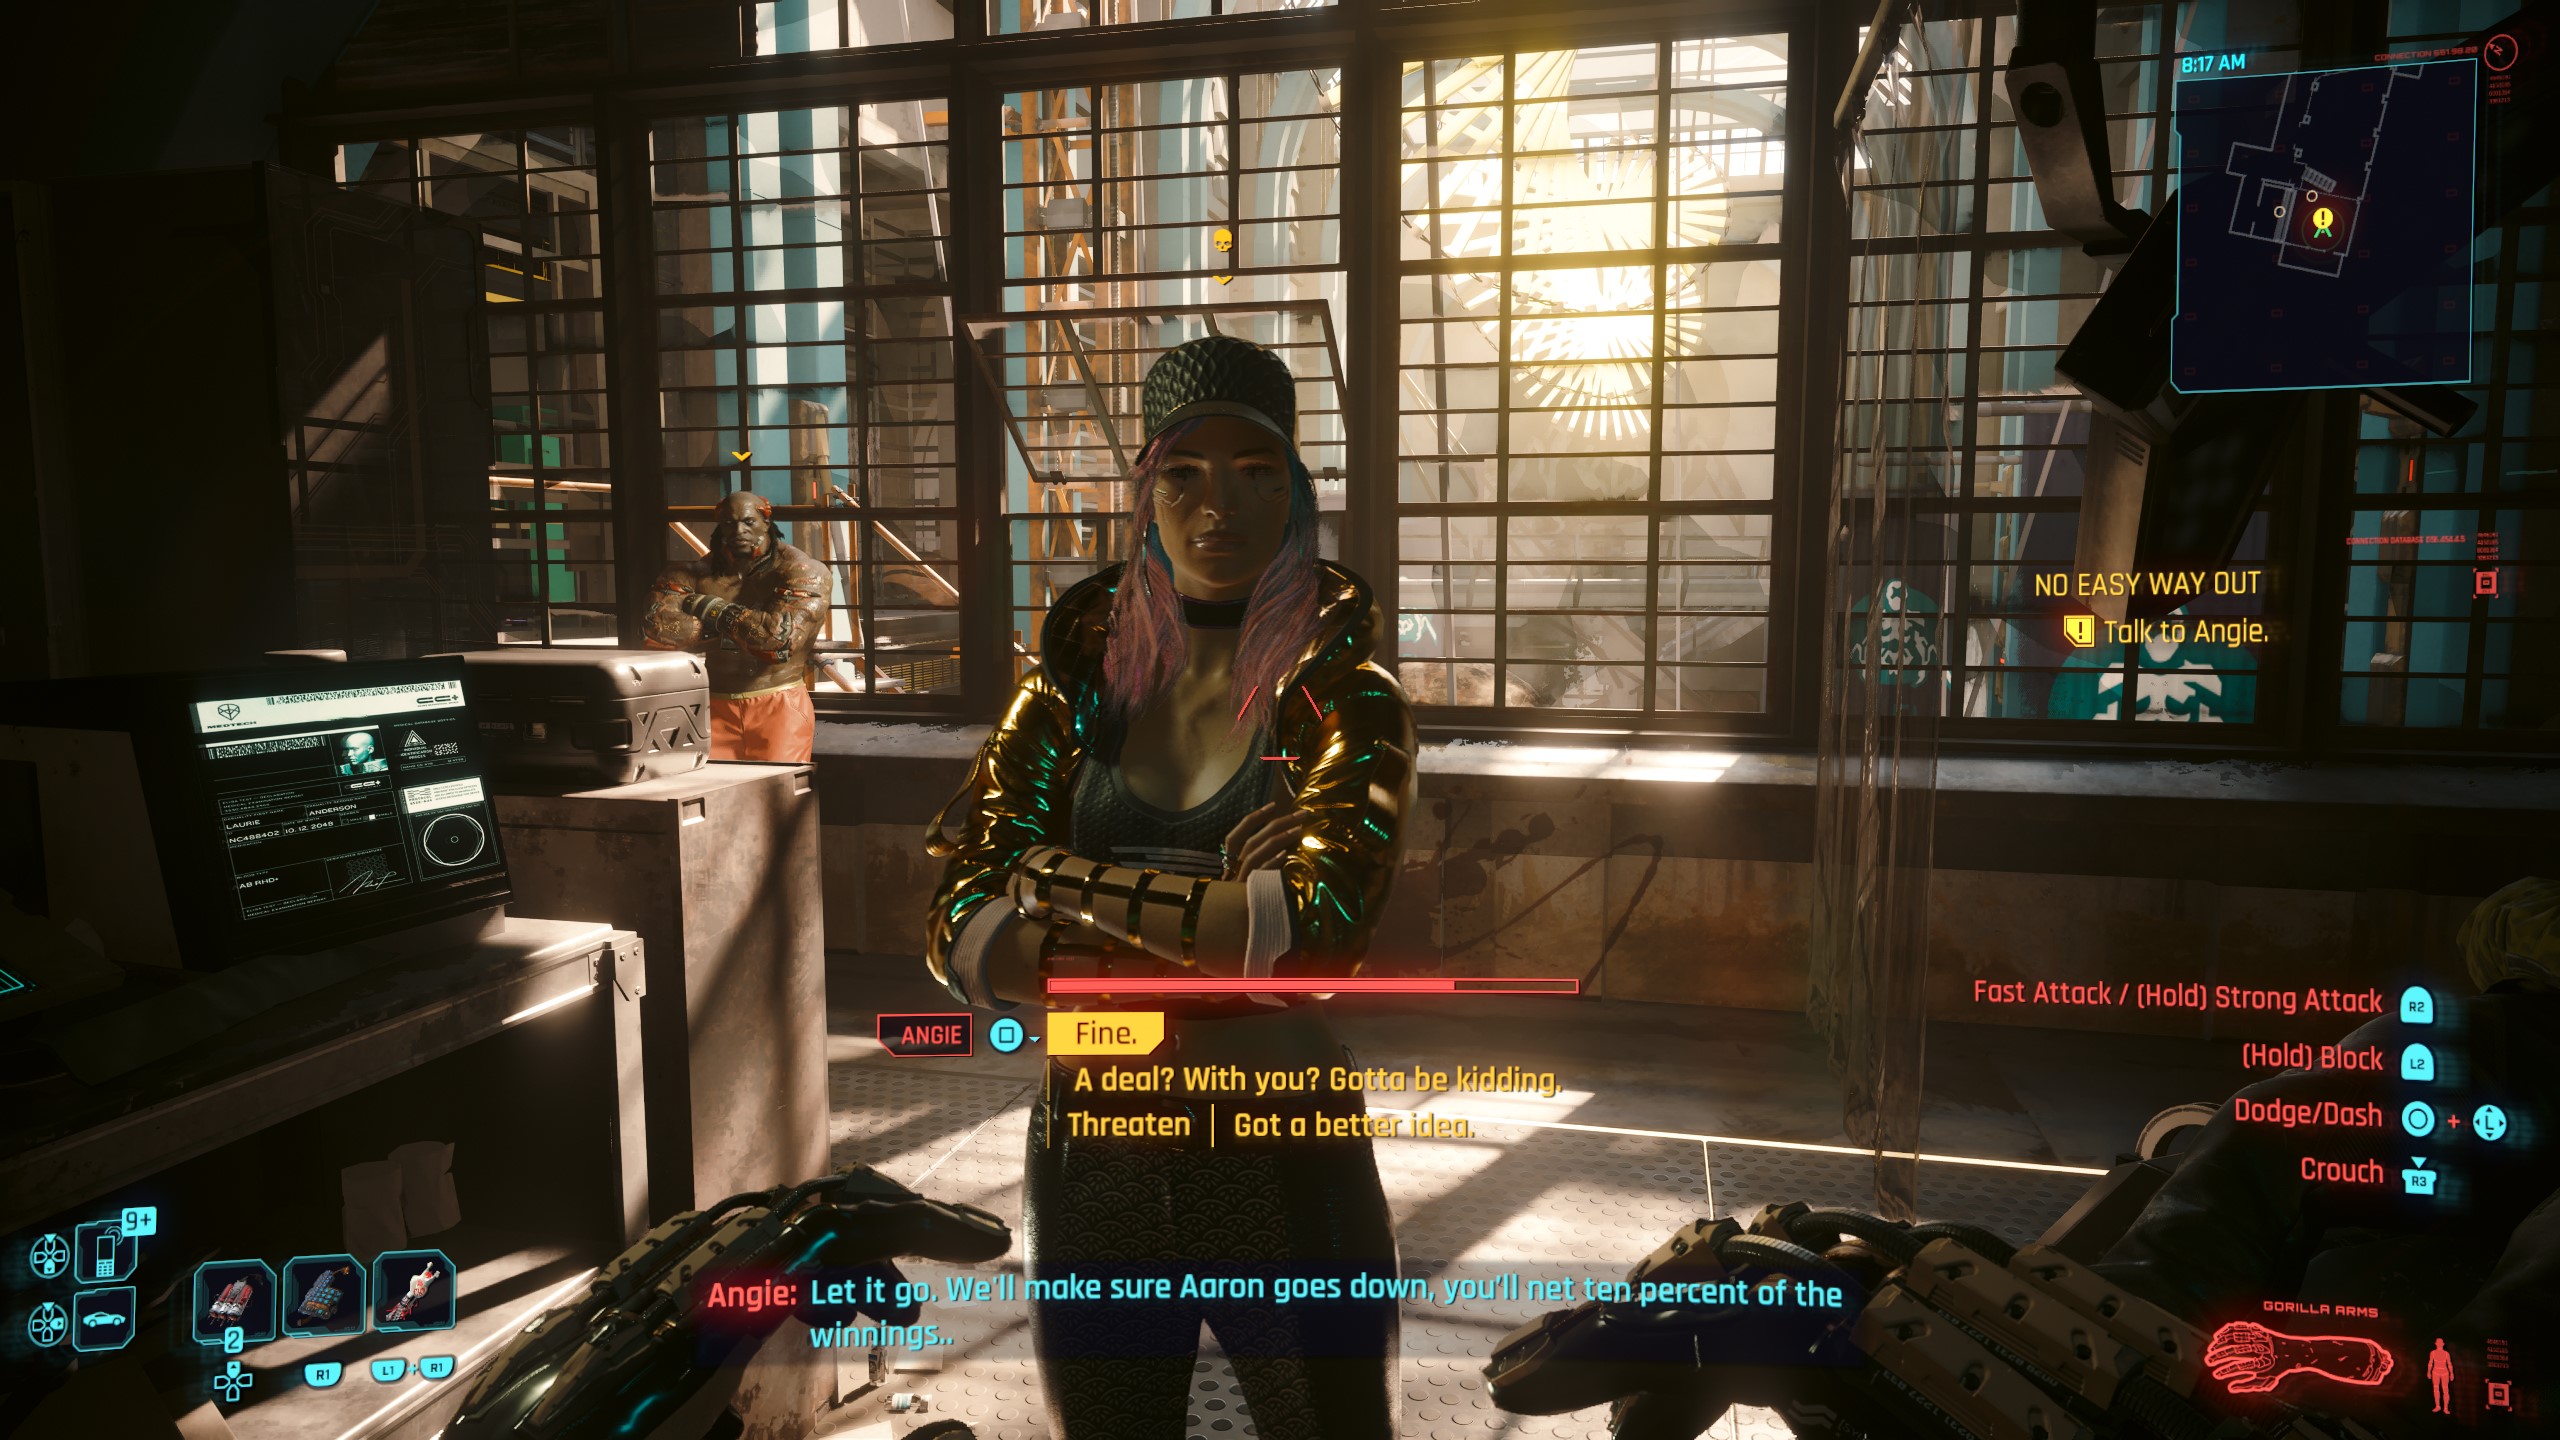 Cyberpunk 2077 No Easy Way Out - Accepting Angie's deal